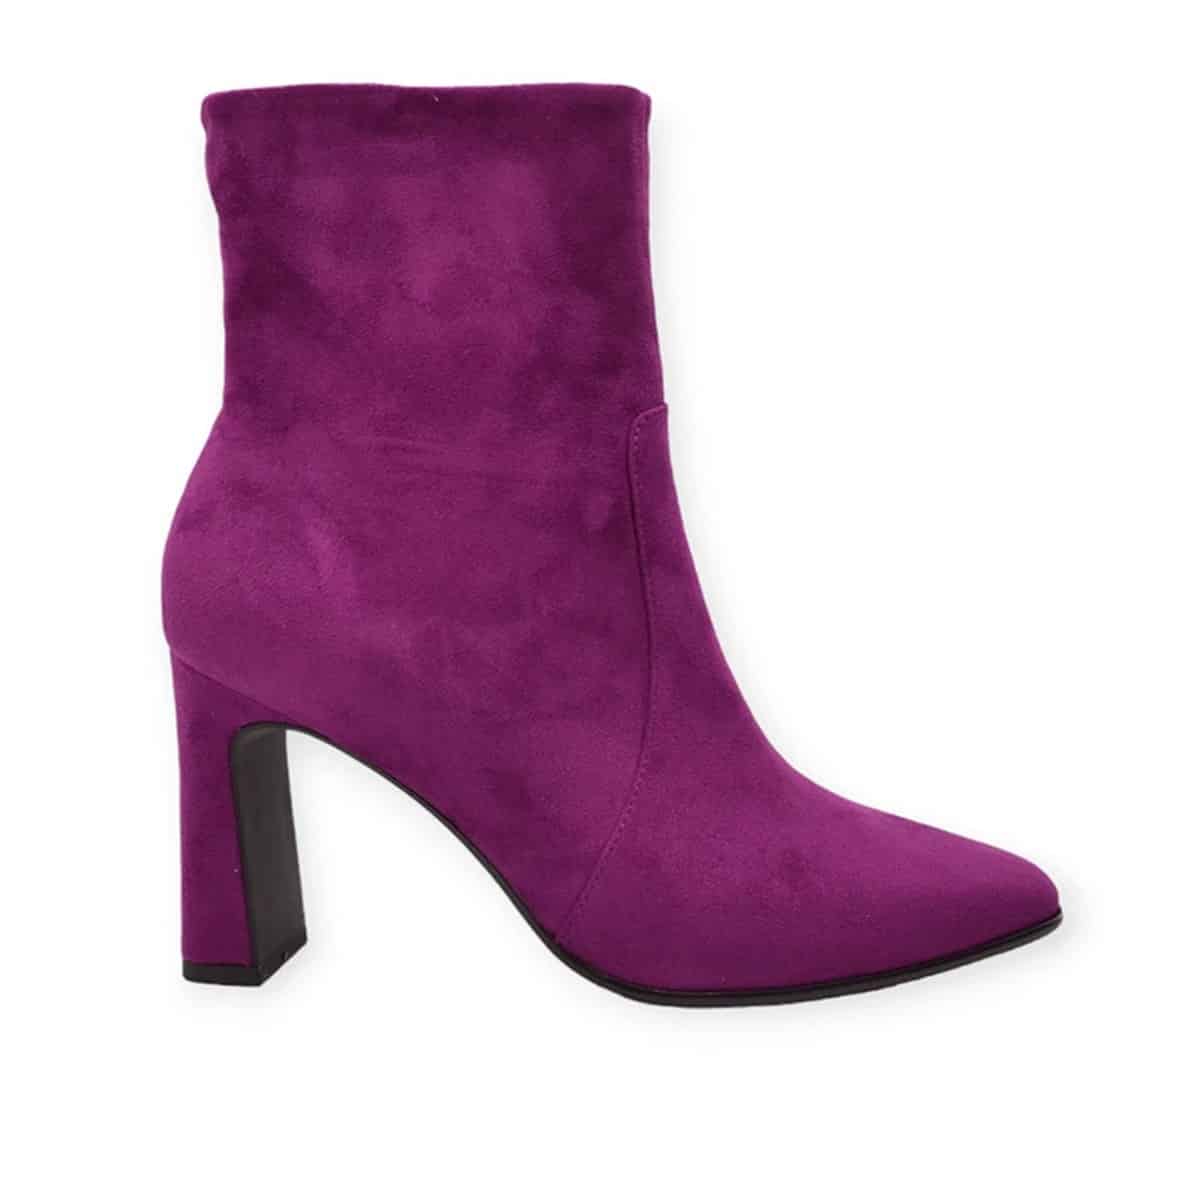 SUEDE HIGH HEELED ANKLE BOOTS 1-25022-41 525 TAMARIS PURPLE